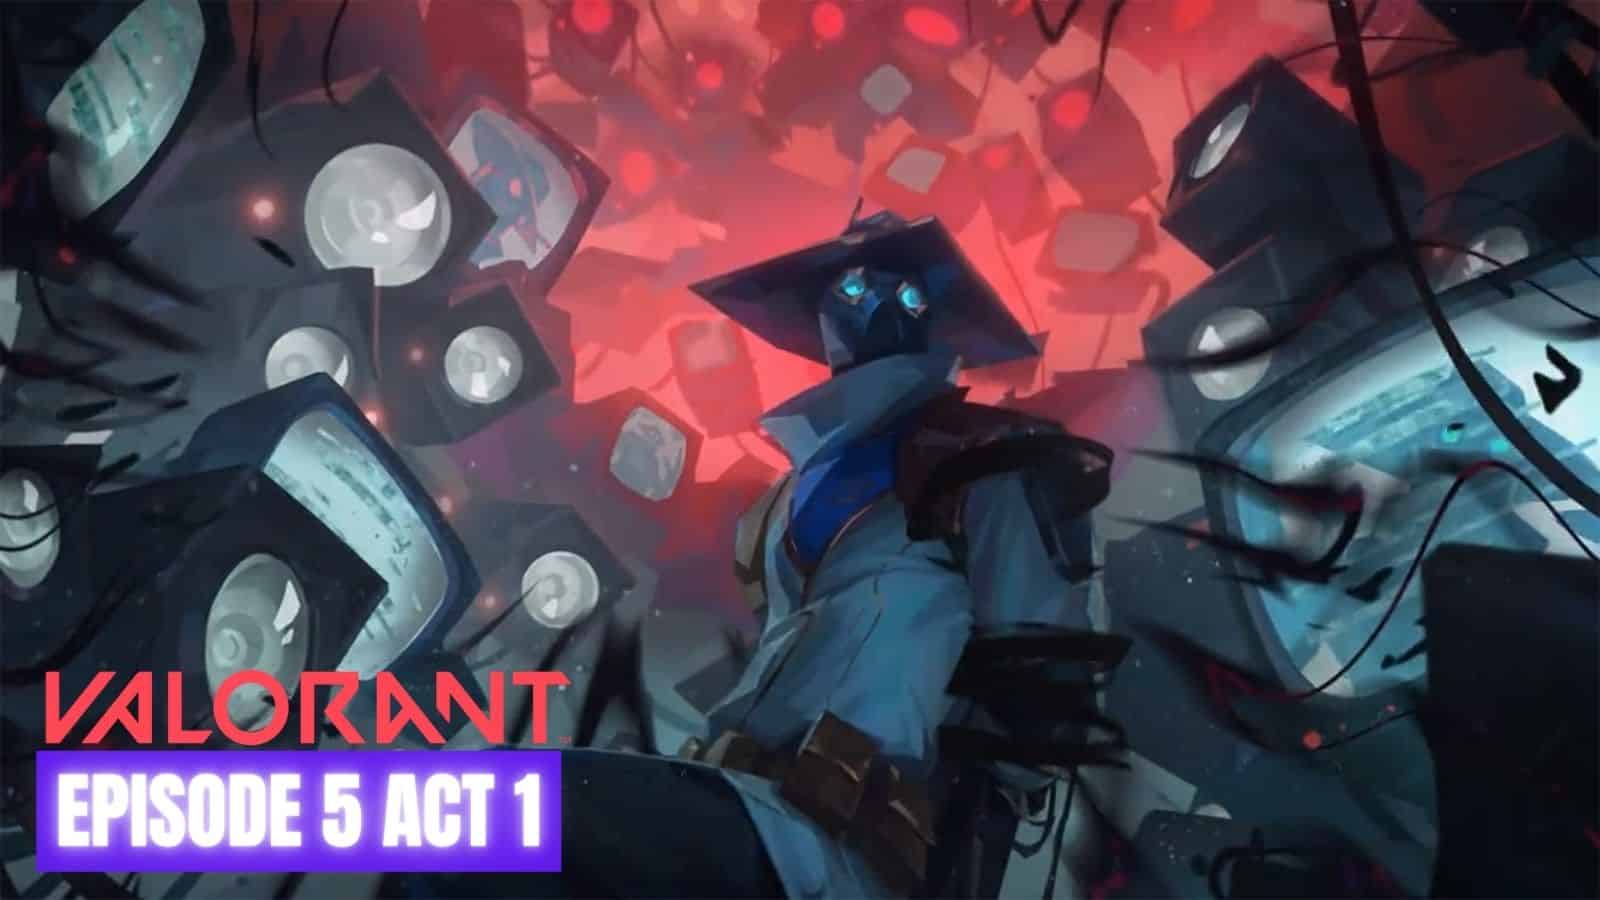 All new Agent voice lines arriving with Valorant Episode 5 Act 1